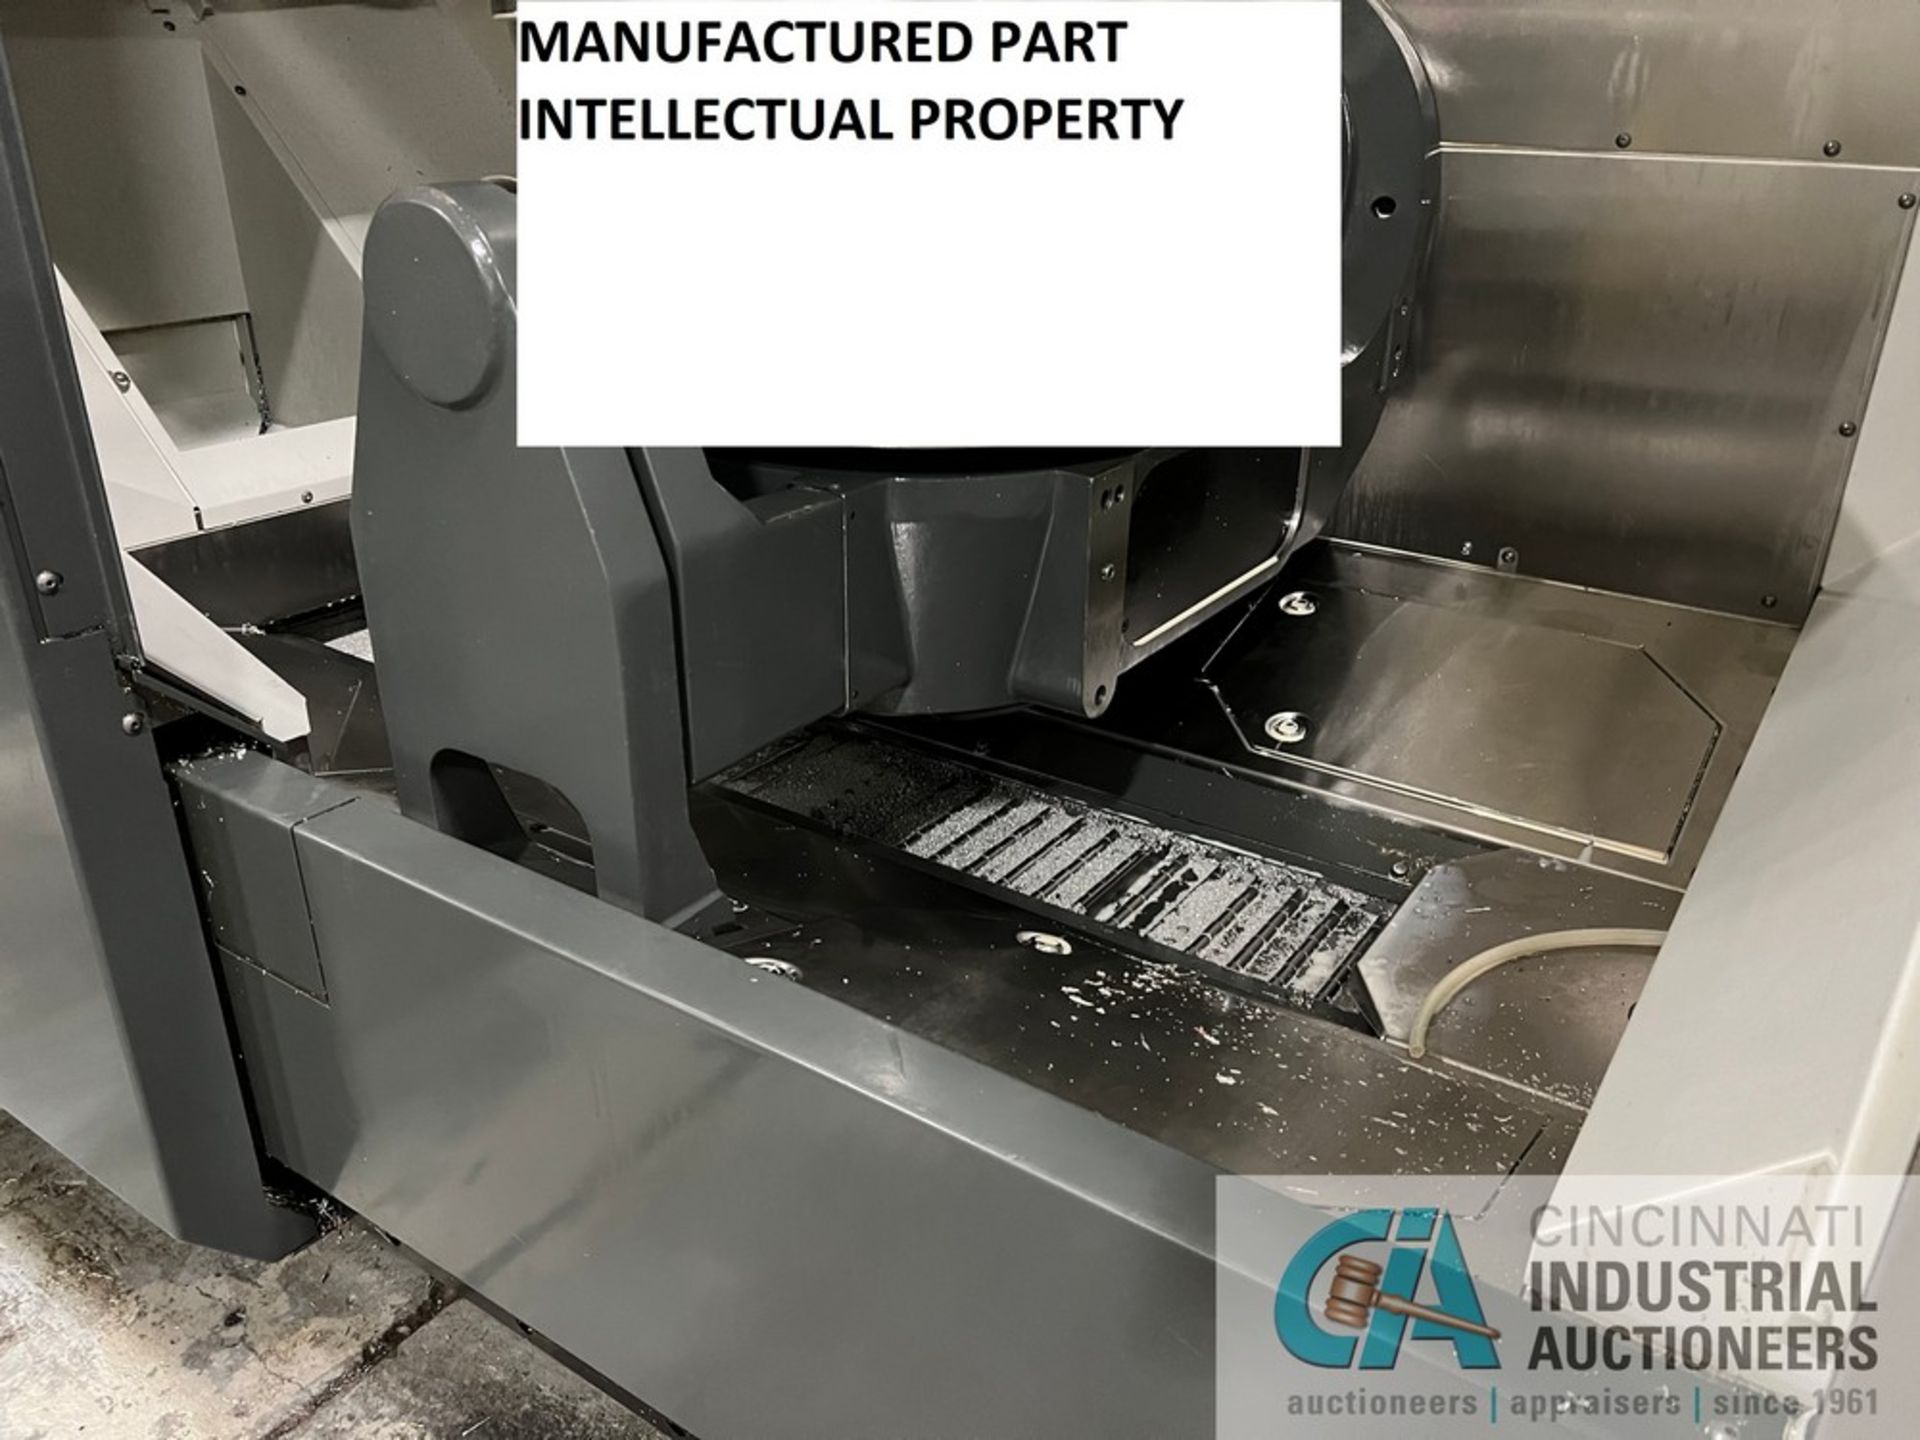 Haas Model UMC-750 Five-Axis CNC Universal Machining Center (2017) 6,578 Cutting Hours Showing - Image 3 of 19